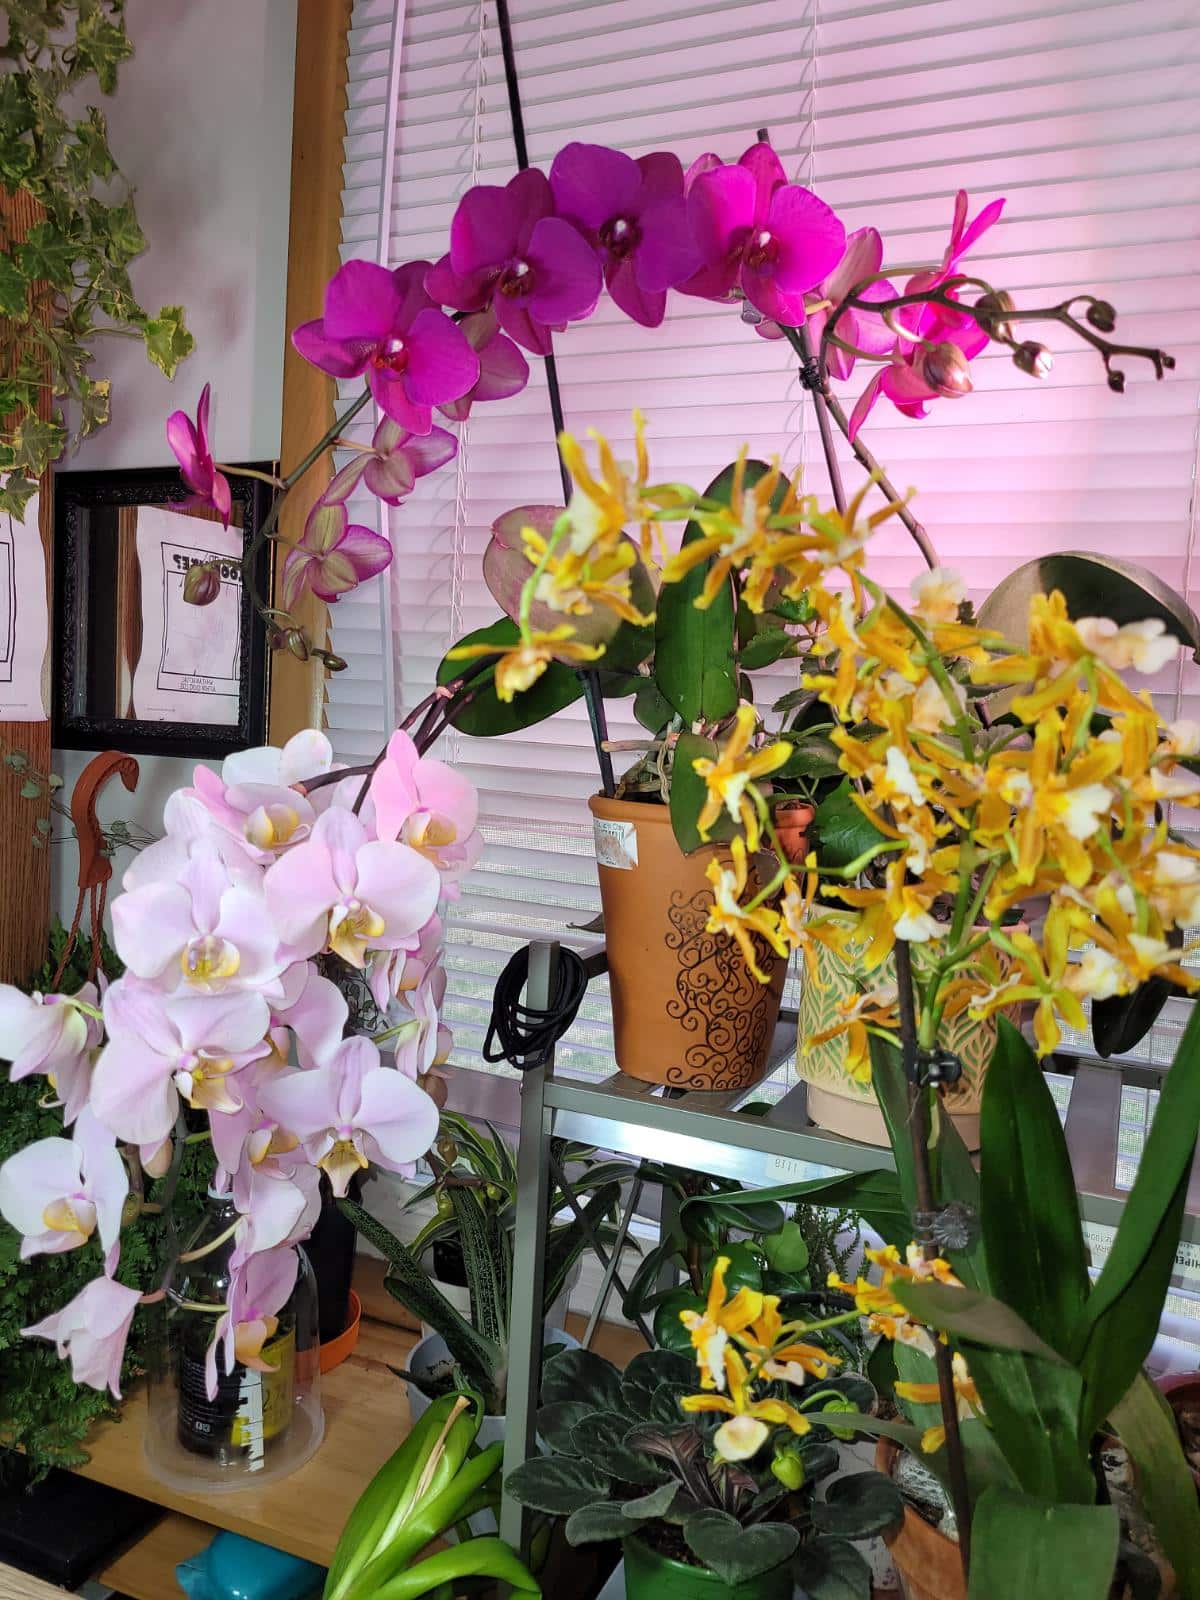 A collection of orchids including phalaenopsis and oncidium orchids